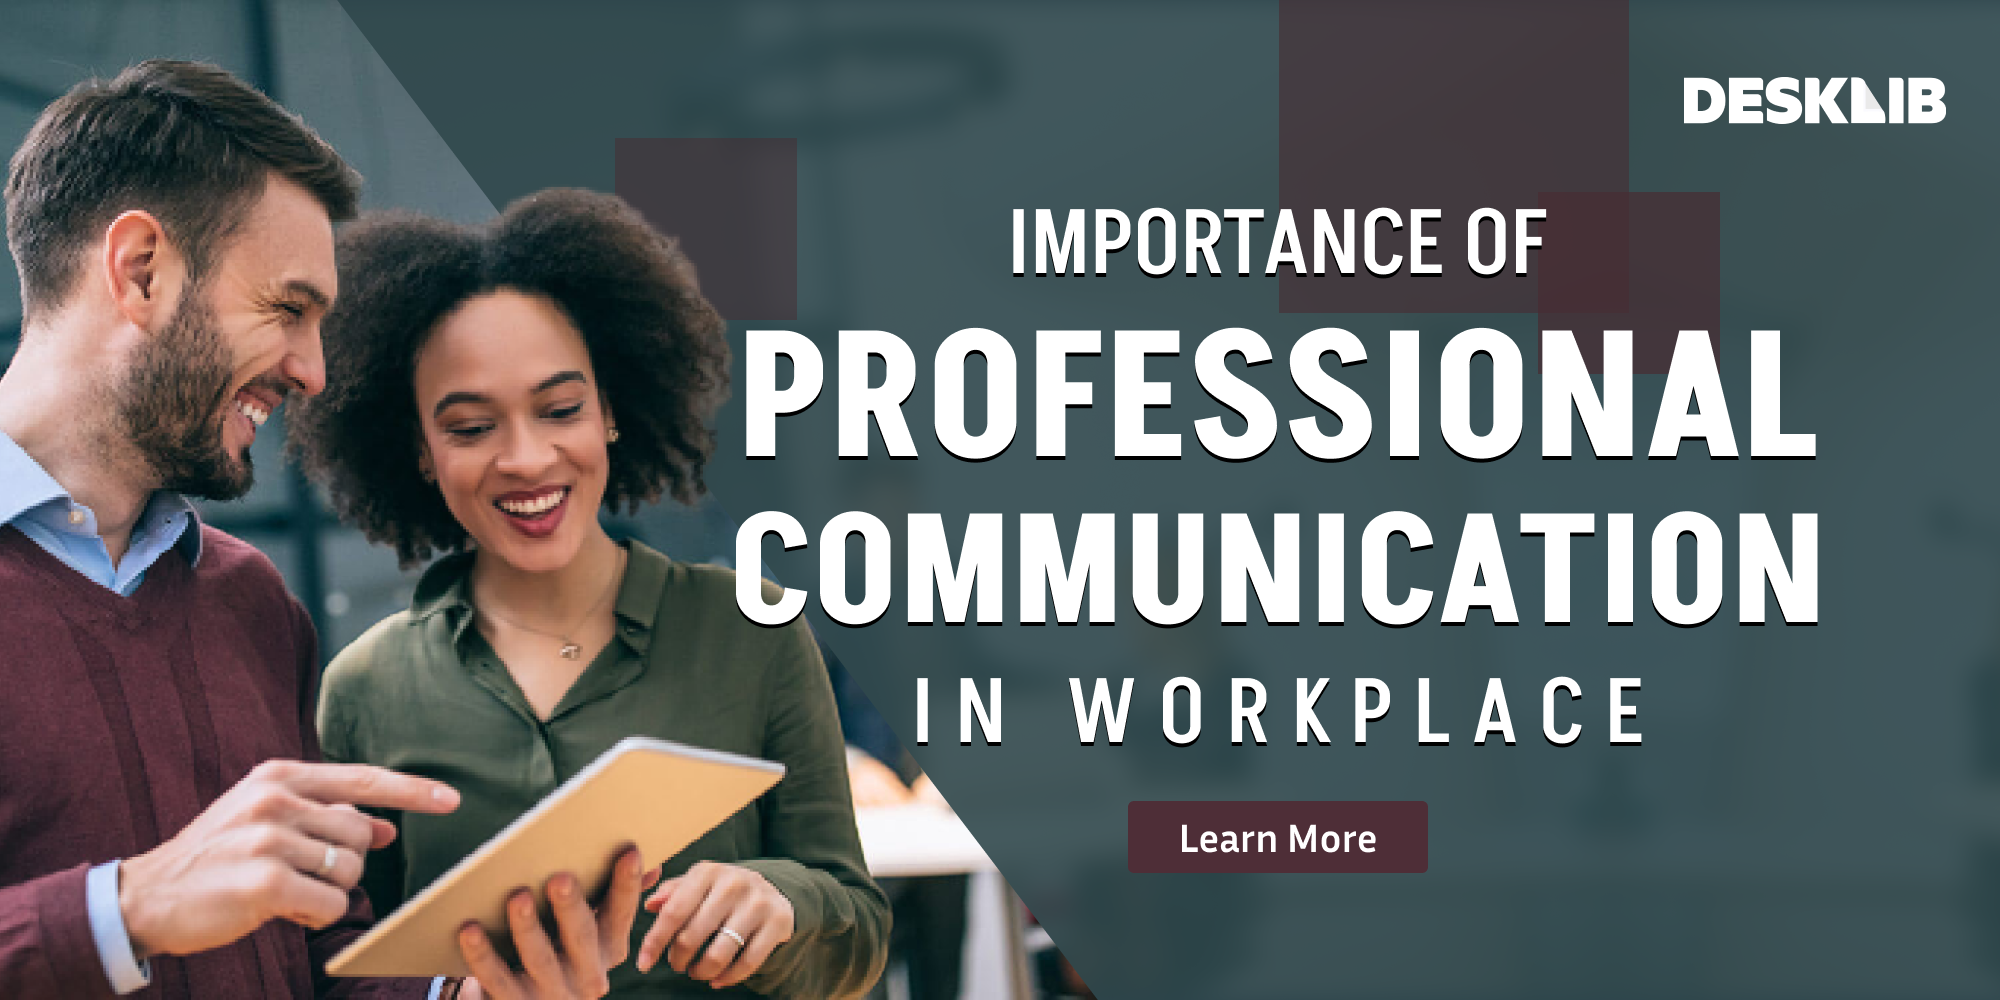 Importance of Professional Communication in Workplace